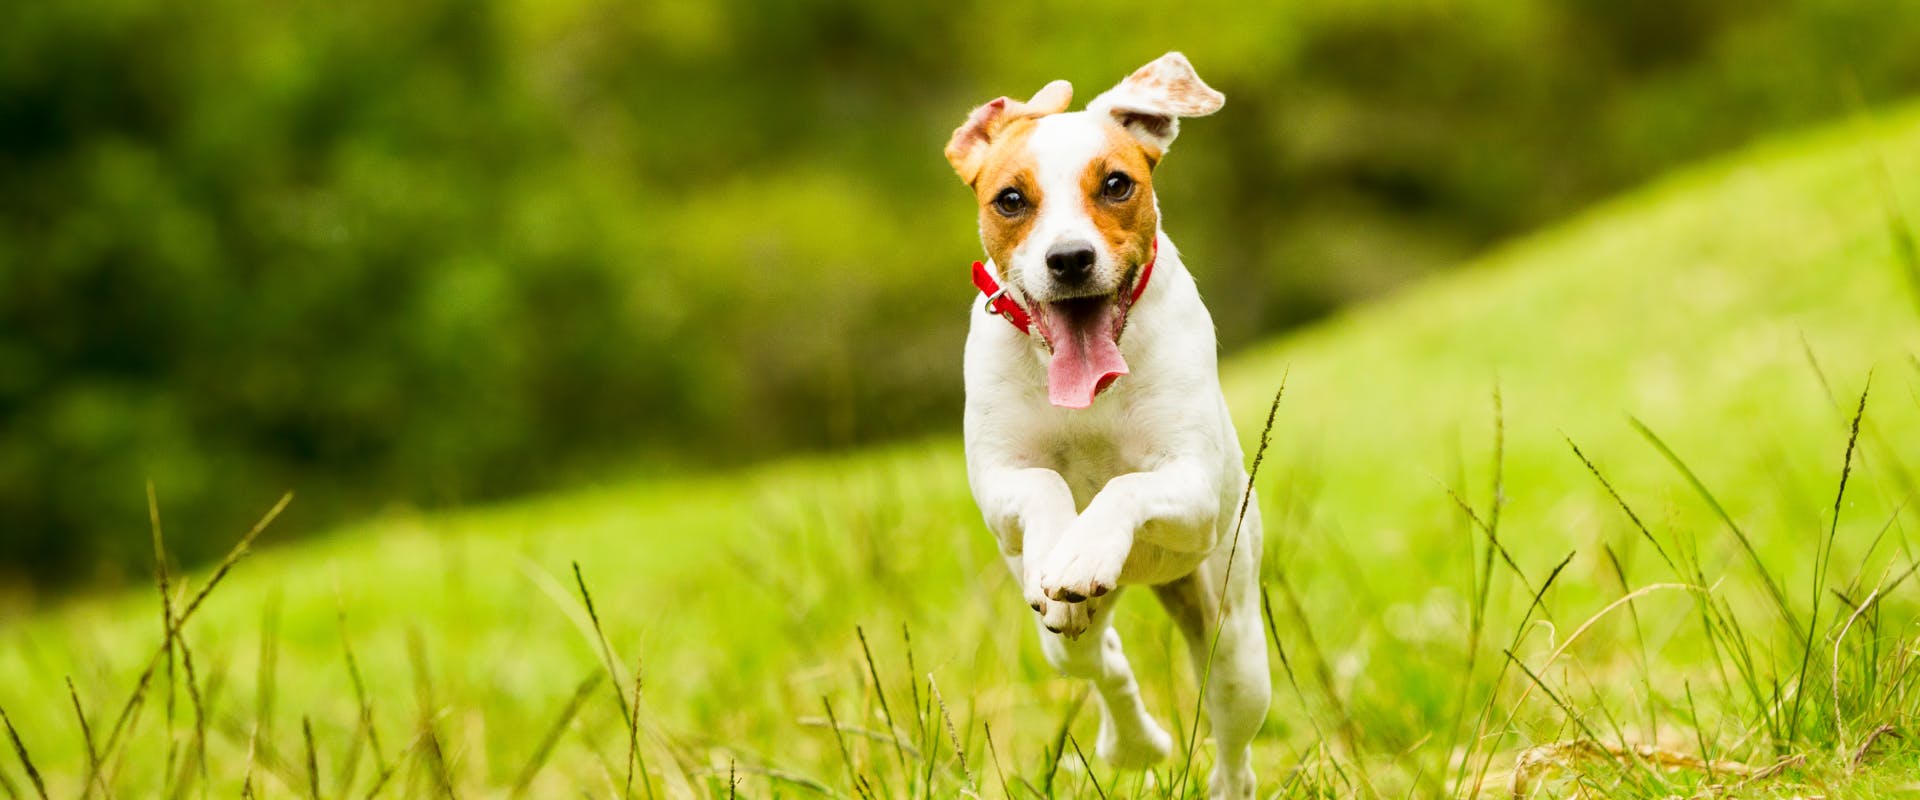 a small high-energy breed dog running through a field of grass with its tongue lolling out